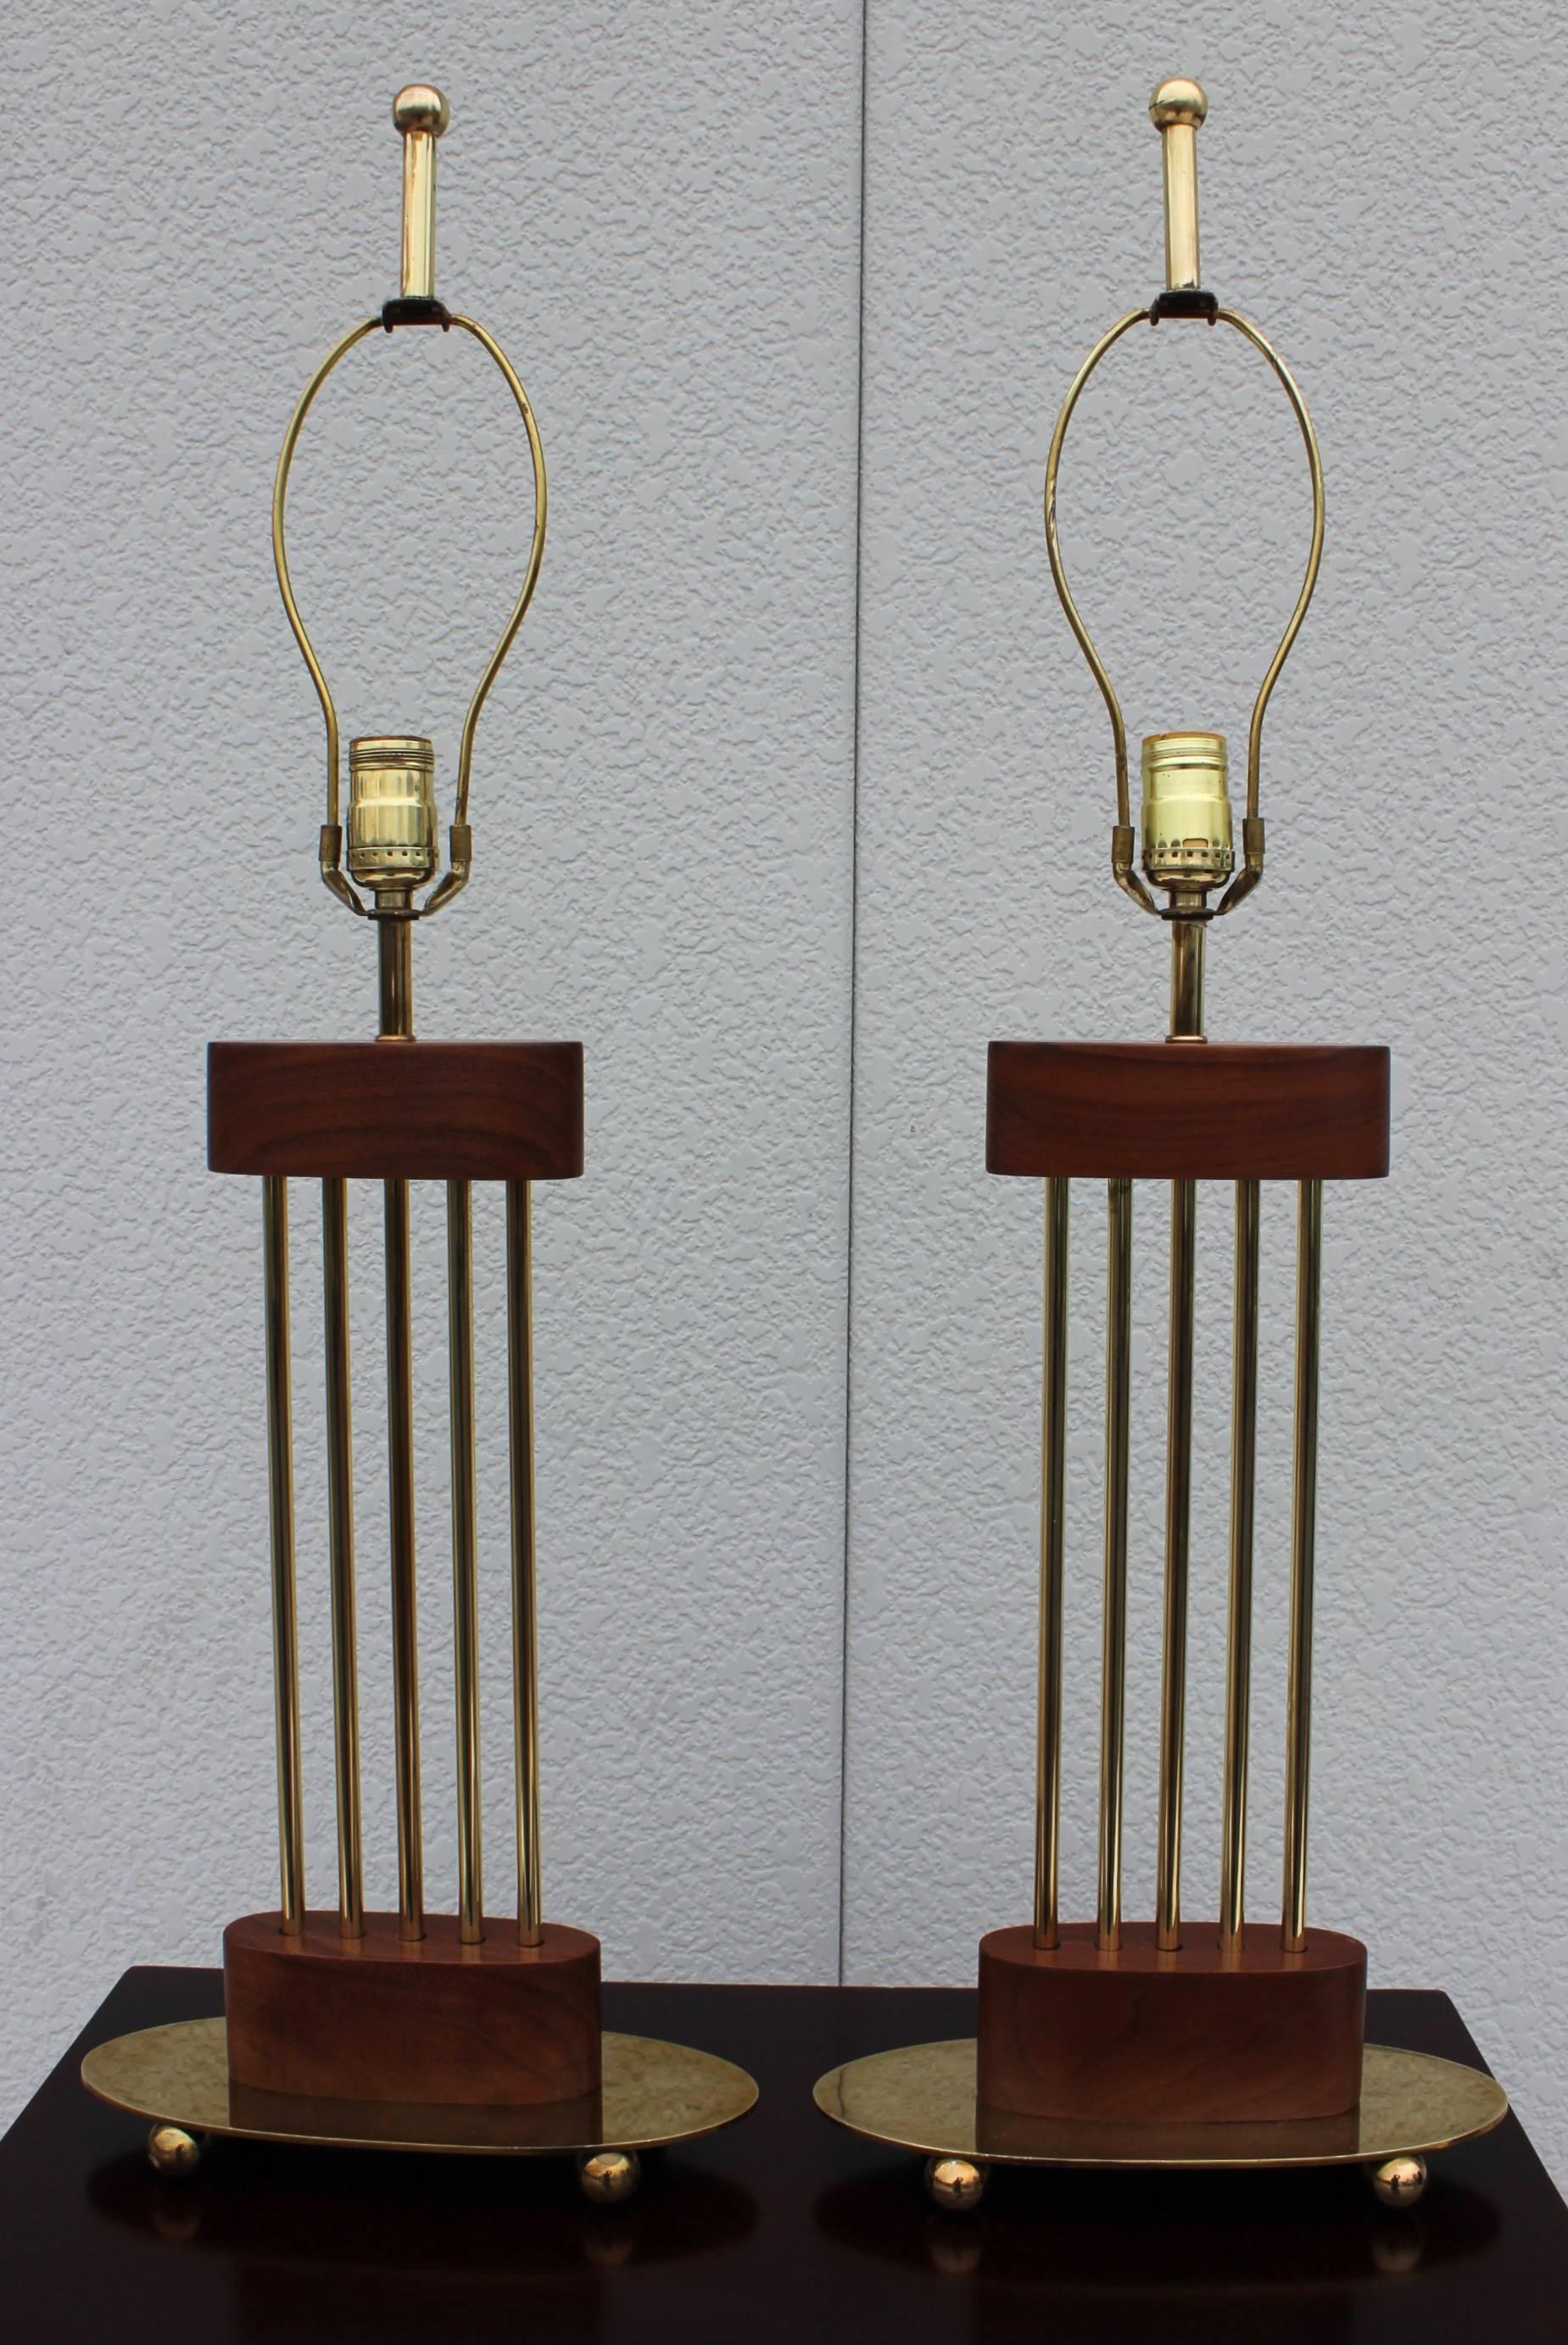 1960s, modern brass and walnut Italian table lamps.

Shades for photography only.

Height to light socket 21.5''.